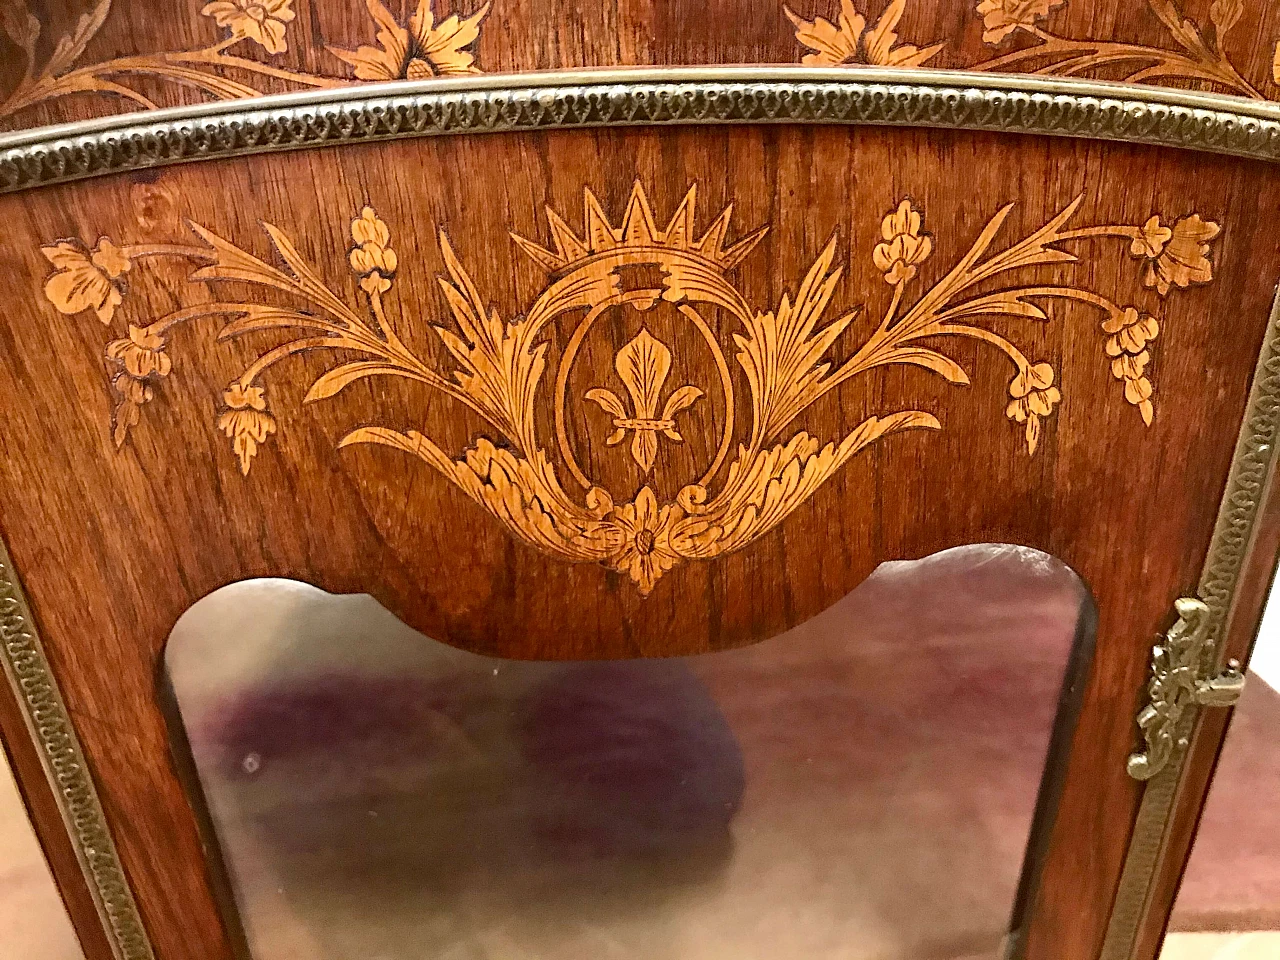 Coach like display case inlaid maple on rosewood with noble coat of arms, rich bronze, original 19th century 1205510